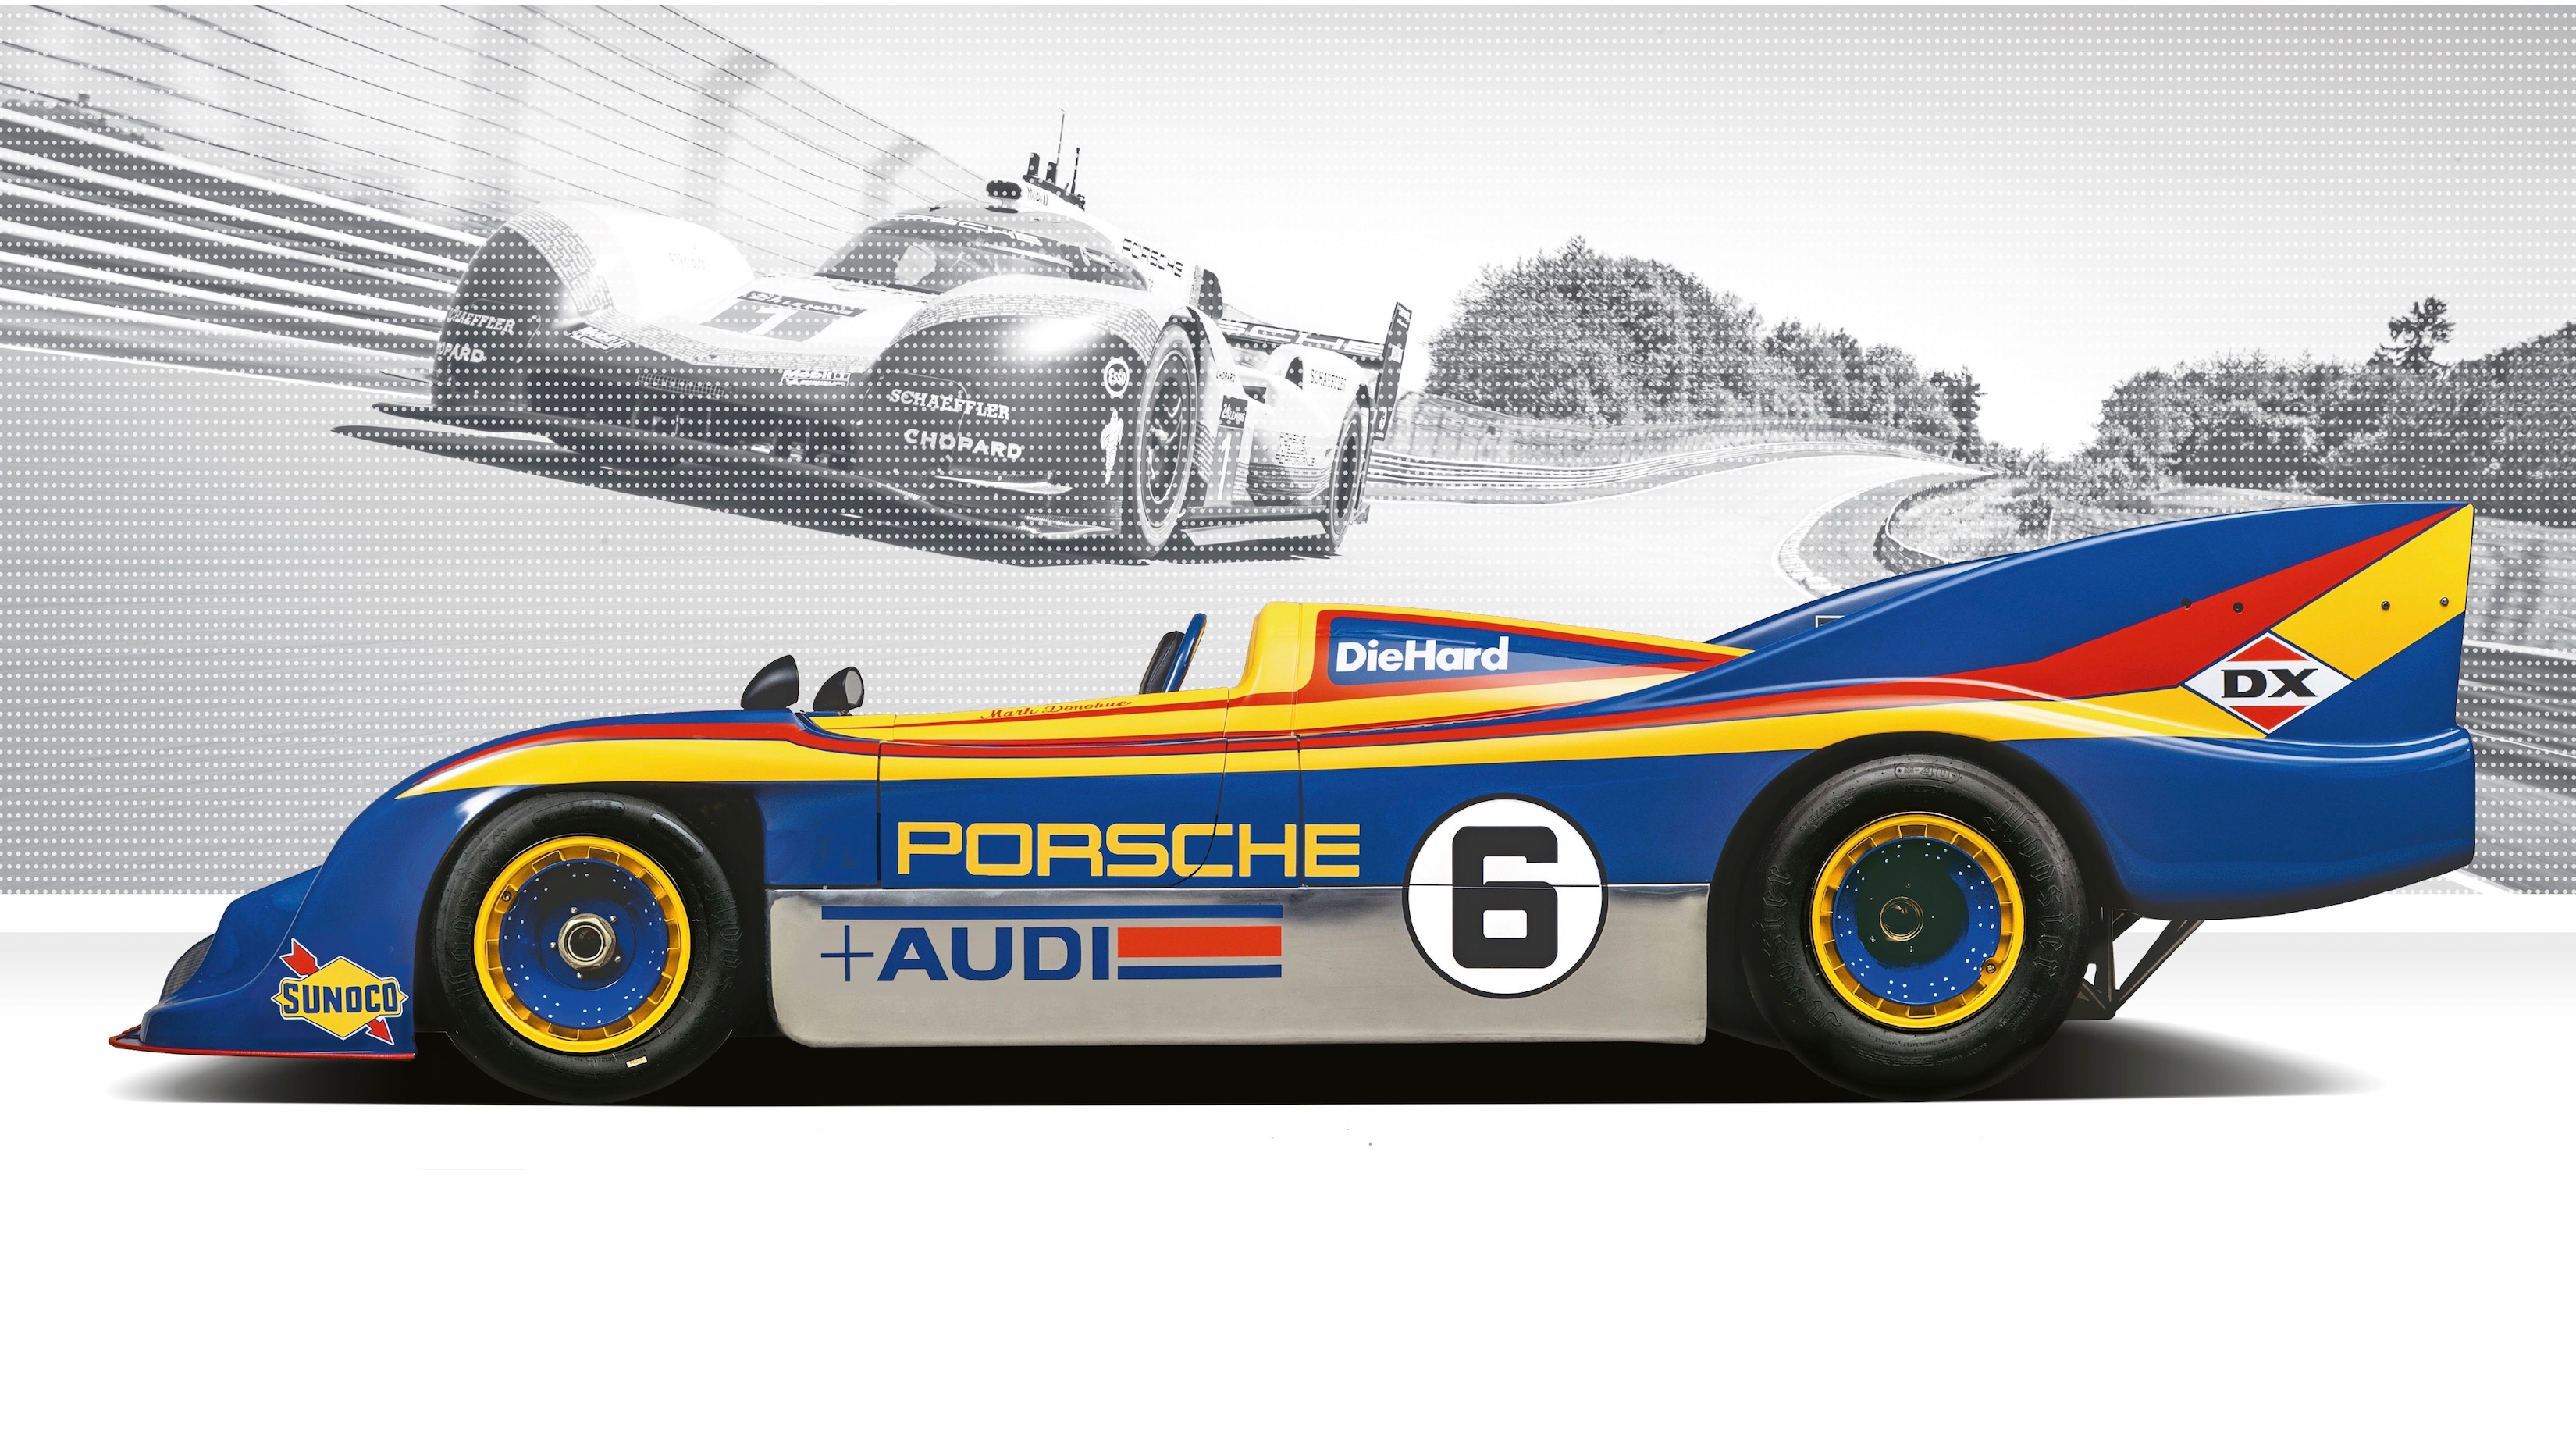 Blue, yellow and red Porsche 917/30 Can-Am race car